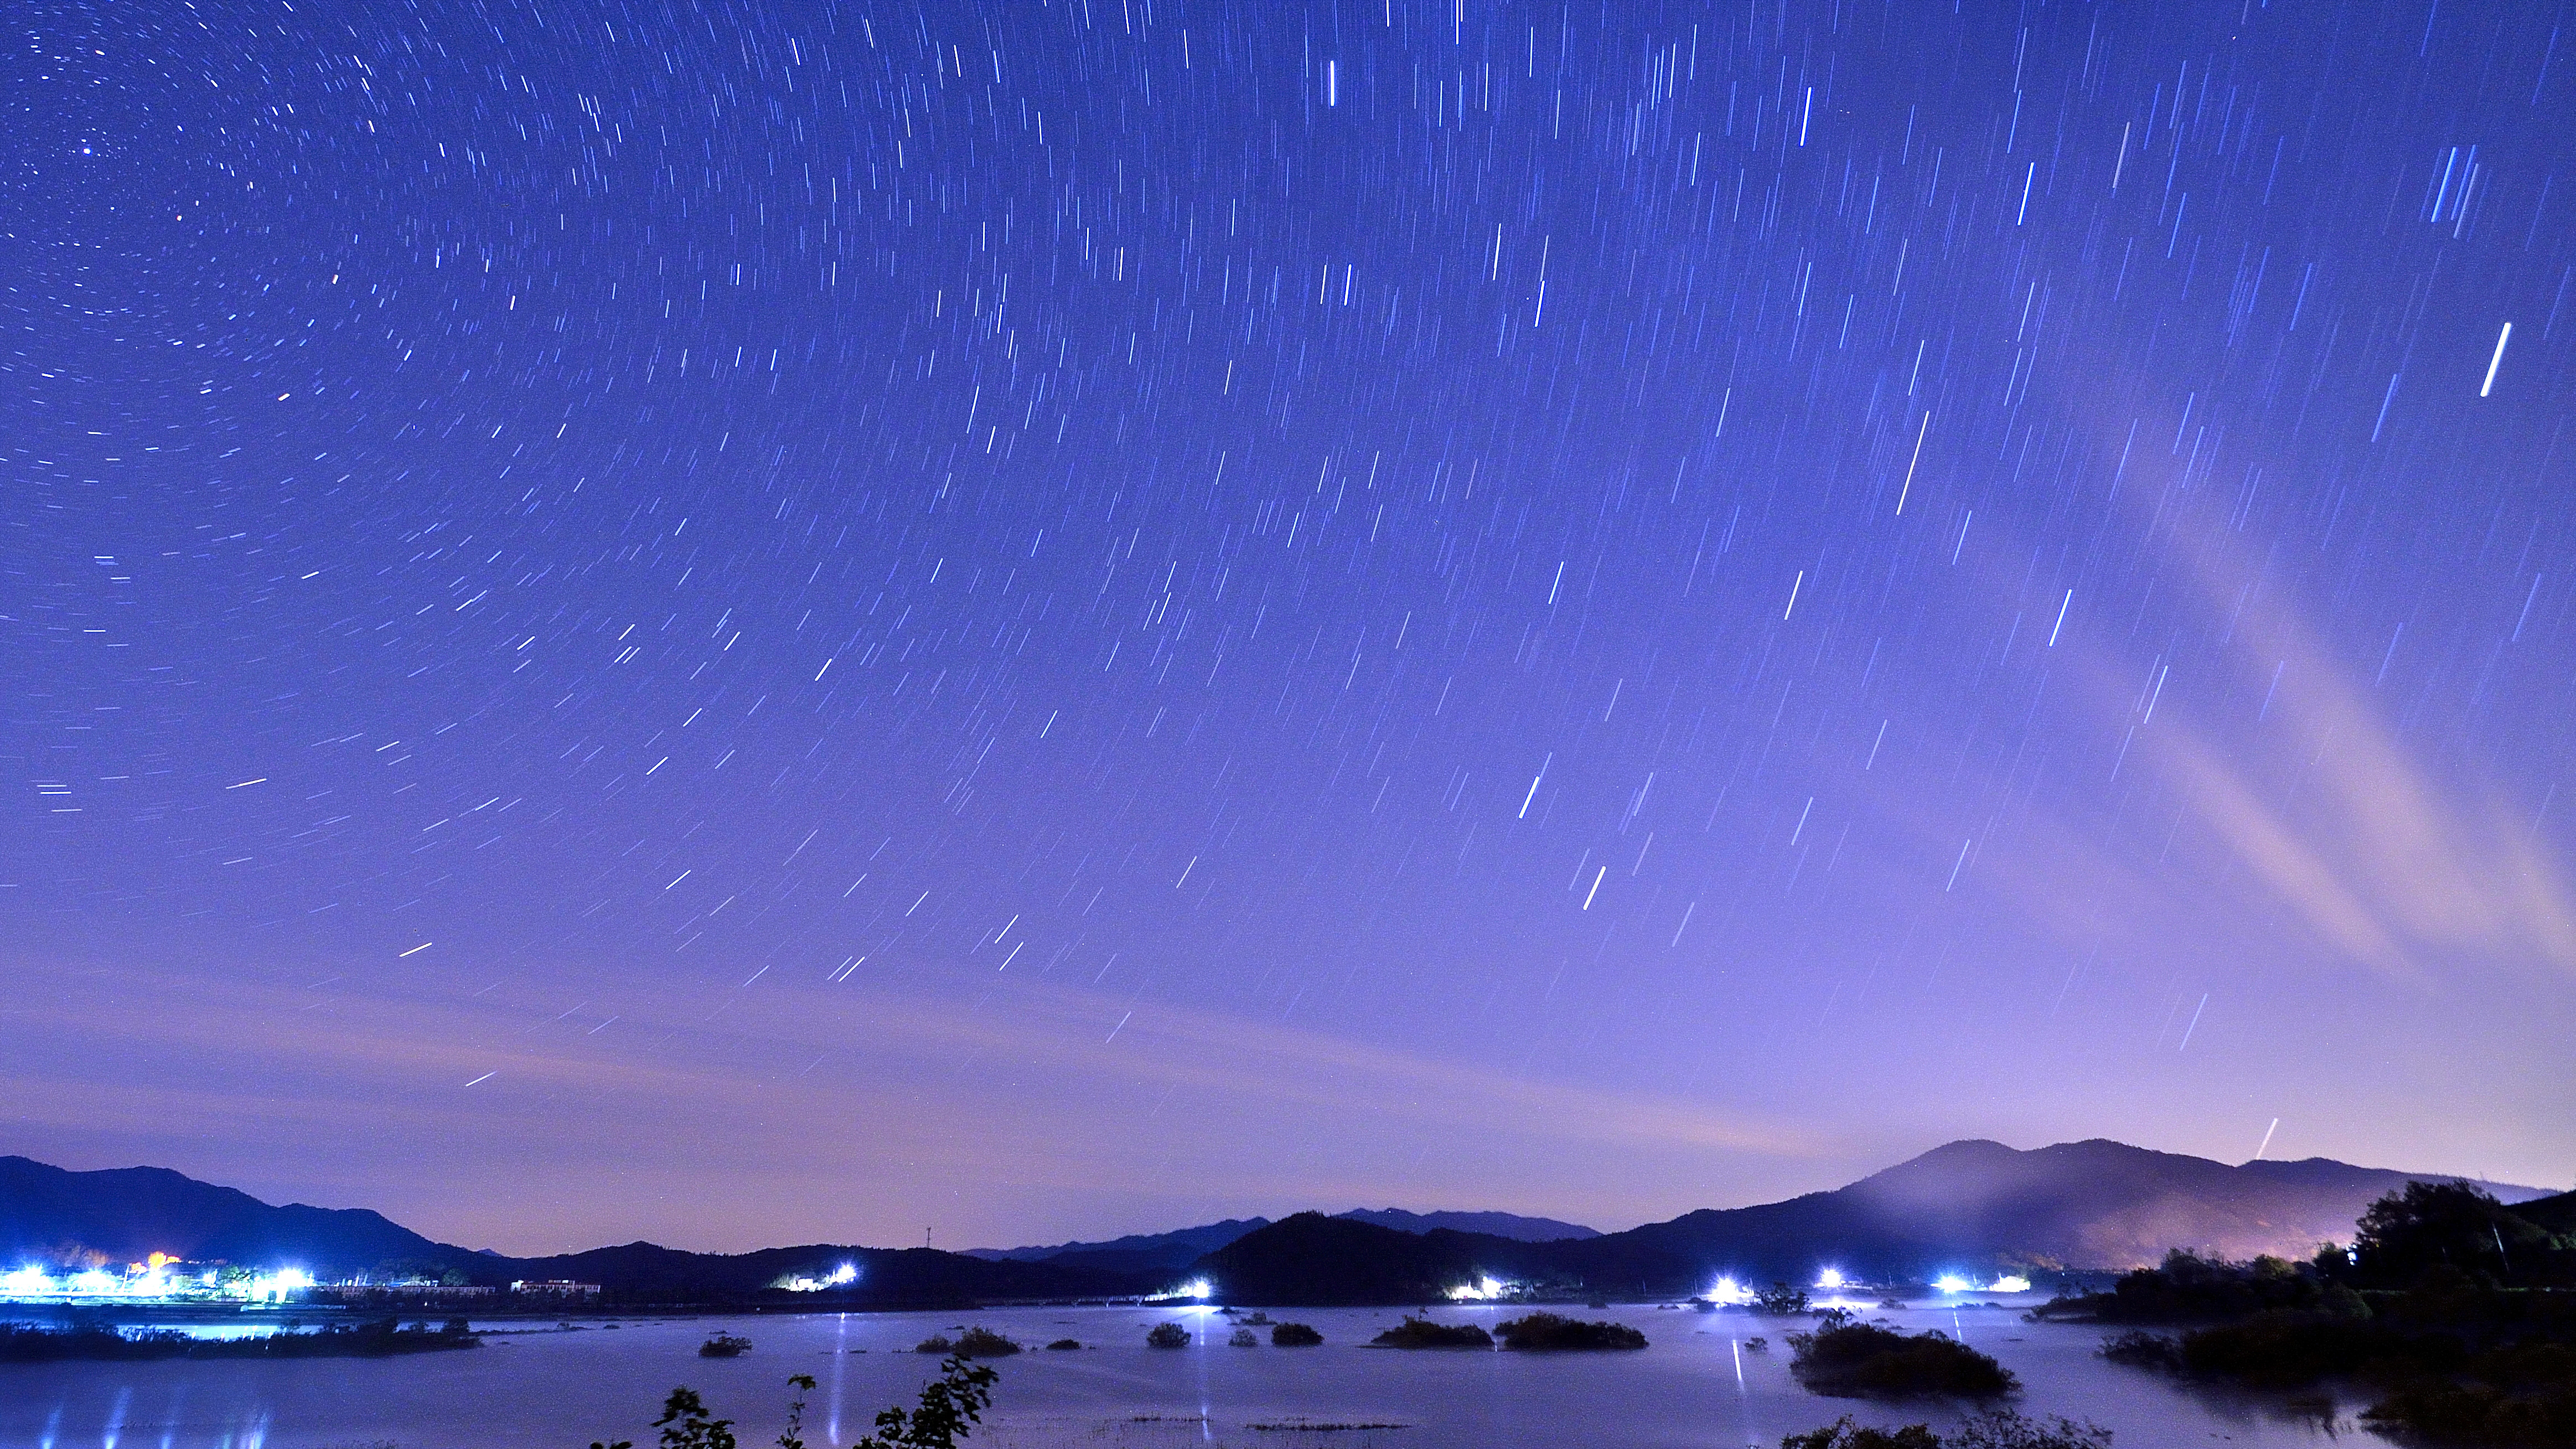 [Accepted] The stars in Juamho lake with flowing night1